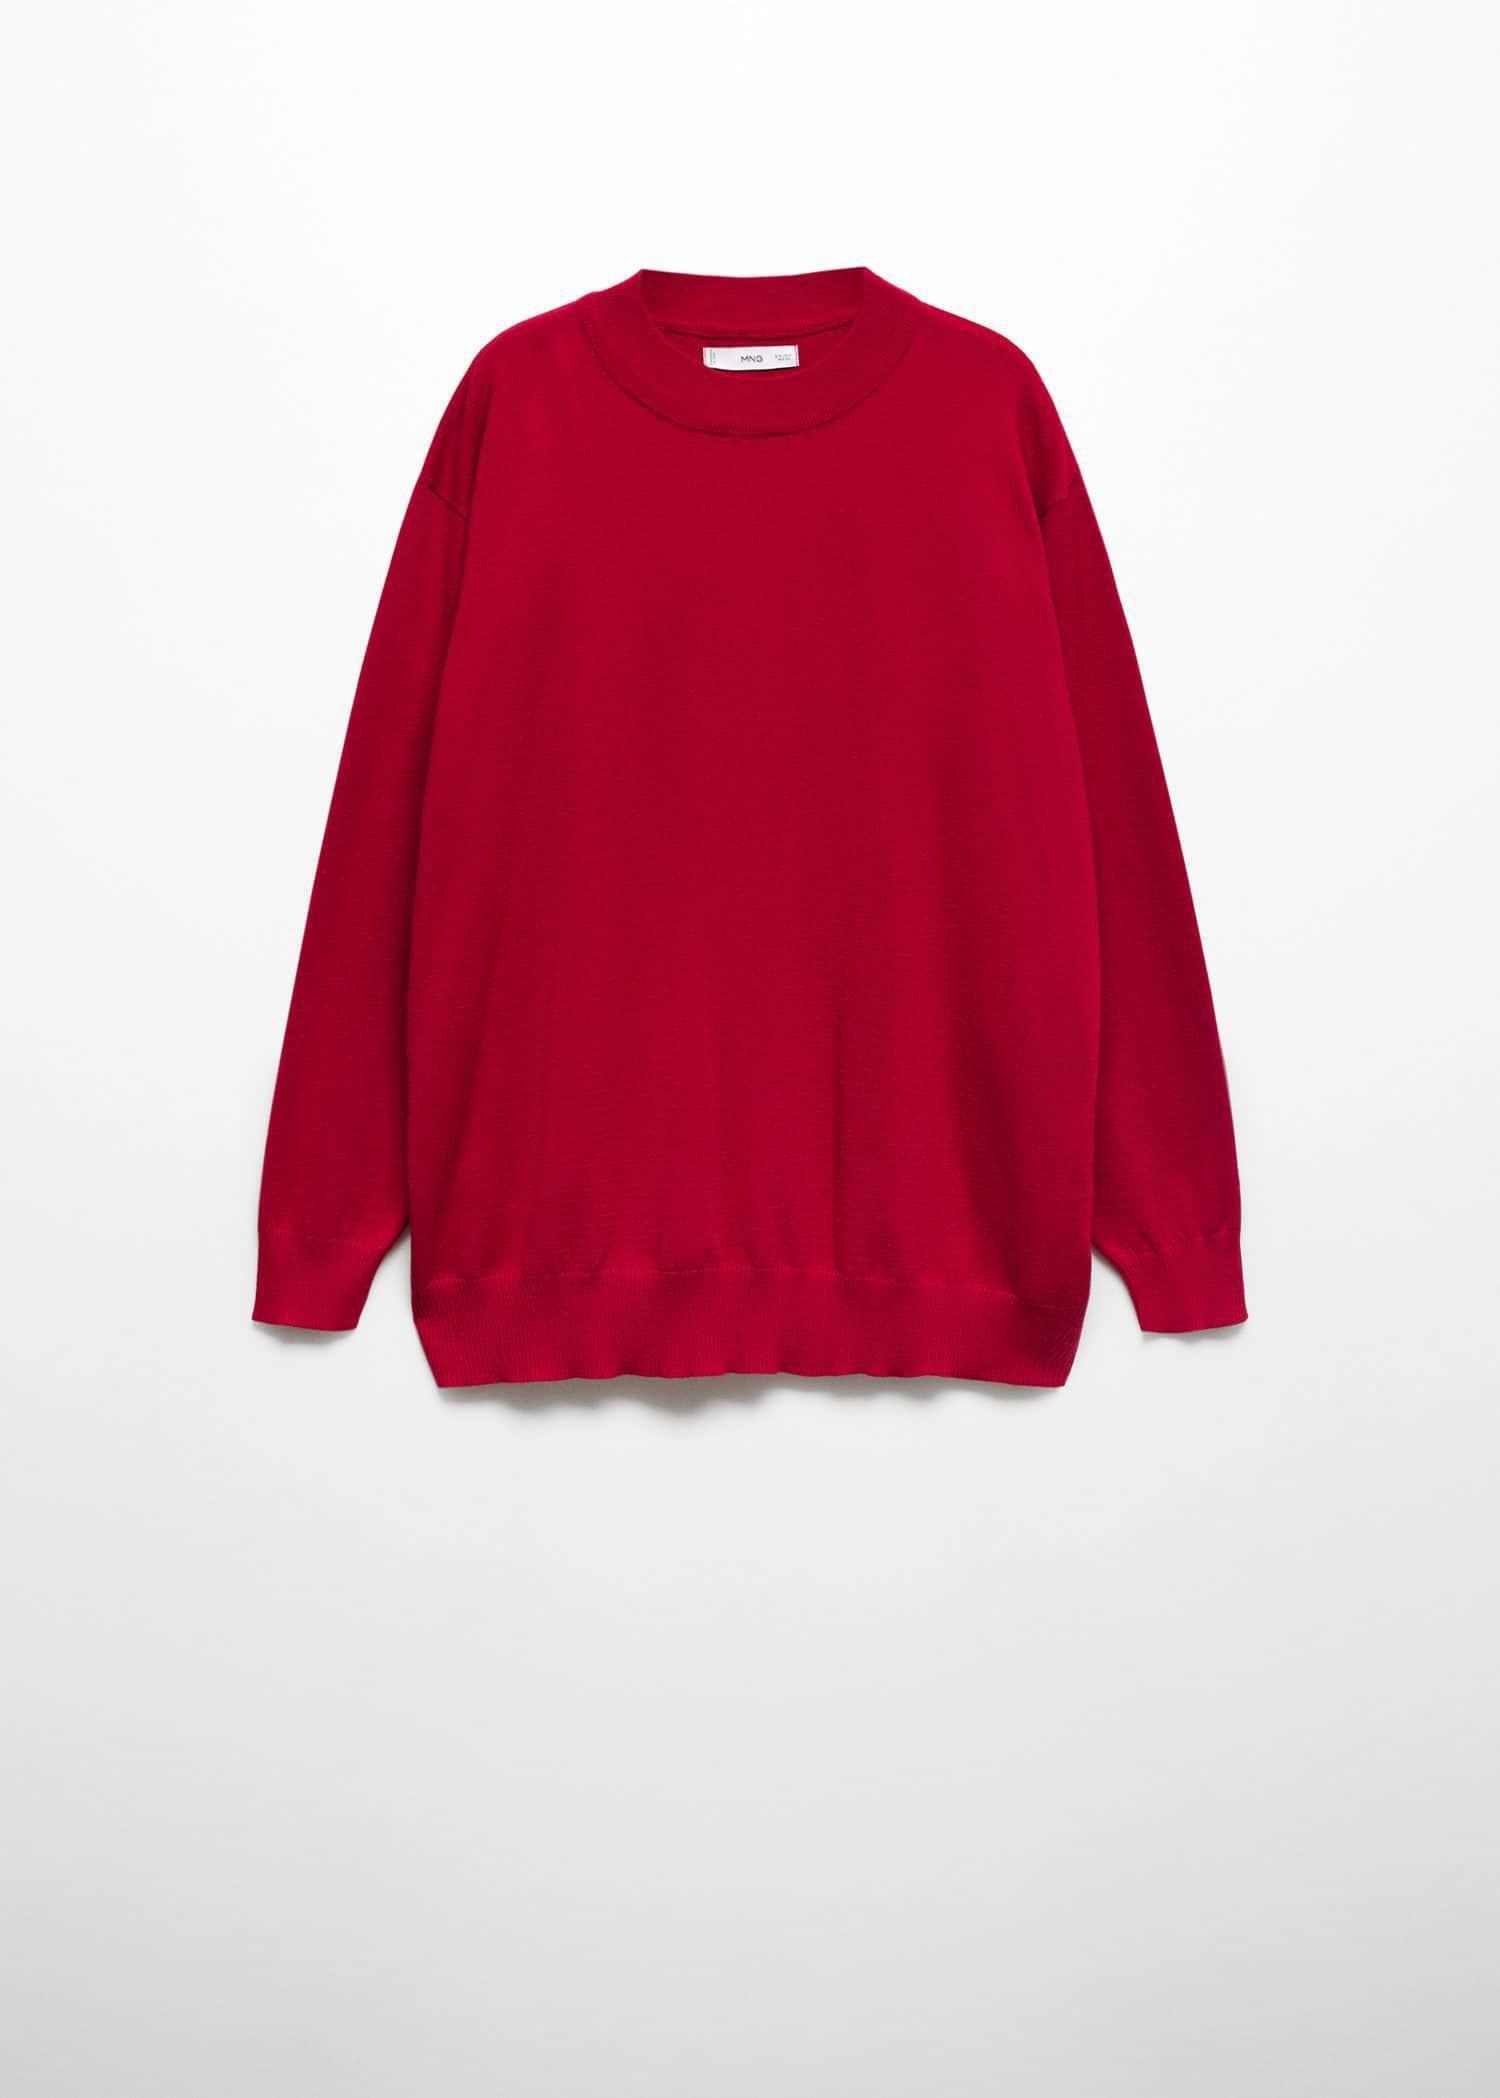 Mango - Red Knitted Sweater